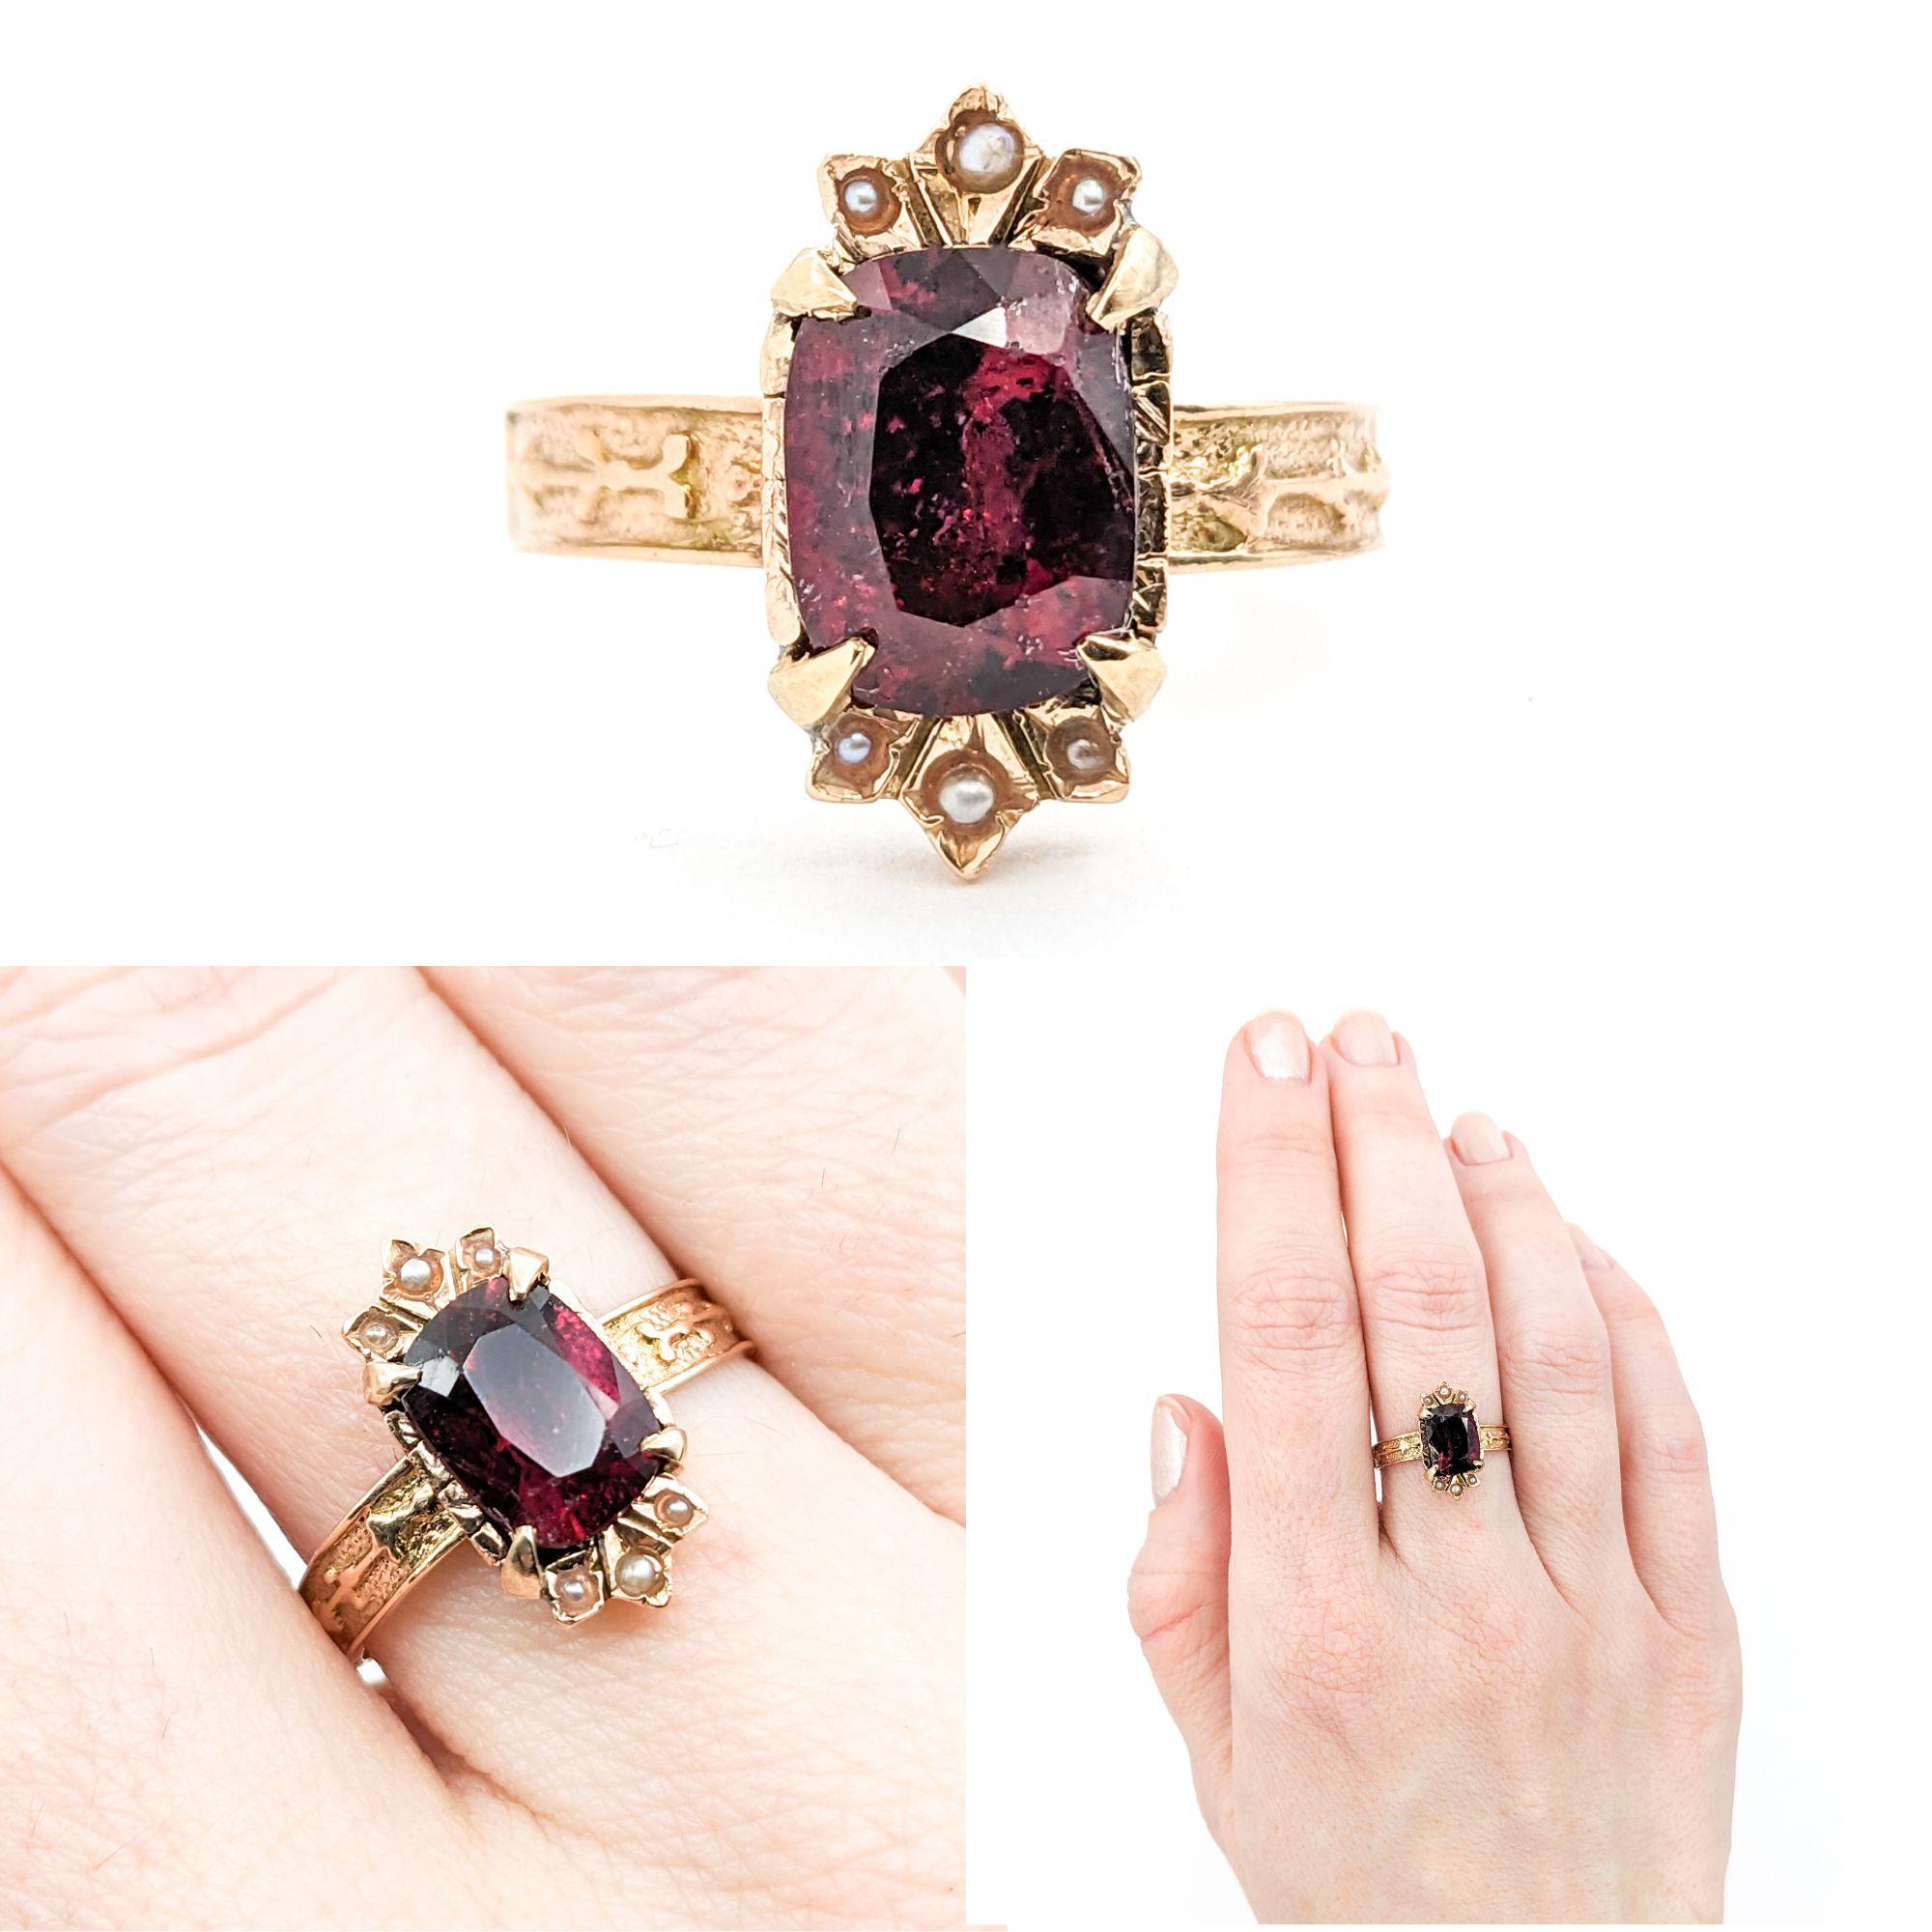 Romantic Antique Rubellite Tourmaline & Seed Pearl Ring in Yellow Gold

Introducing this beautiful antique ring, exquisitely crafted in 14k yellow gold. This unique piece showcases a striking 1.69ct cushion cut Rubellite Tourmaline centerpiece,